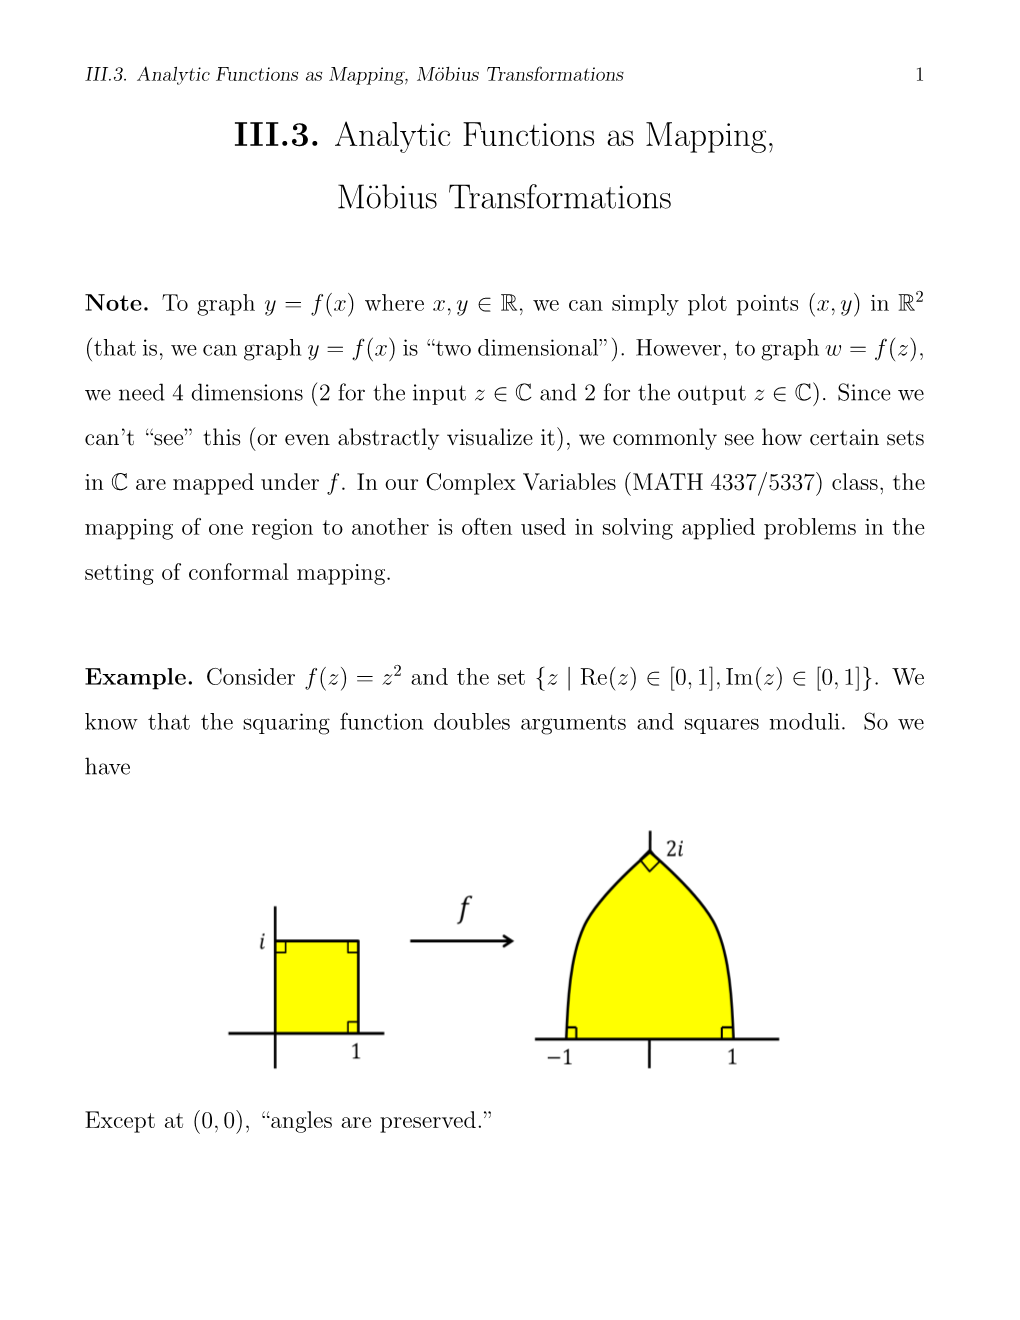 III.3. Analytic Functions As Mapping, Möbius Transformations